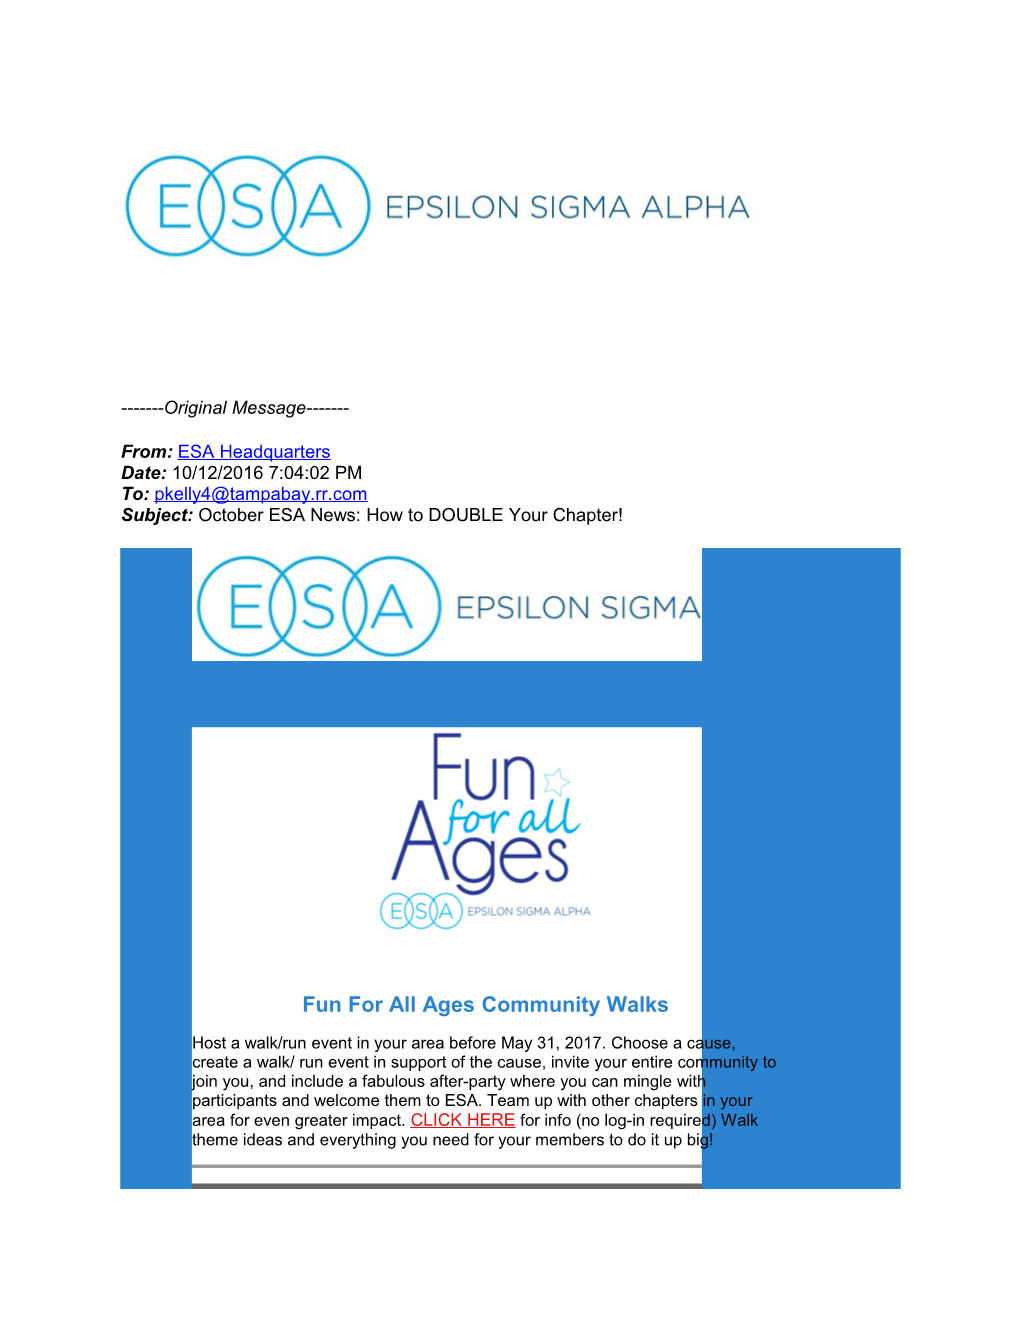 Subject: October ESA News: How to DOUBLE Your Chapter!